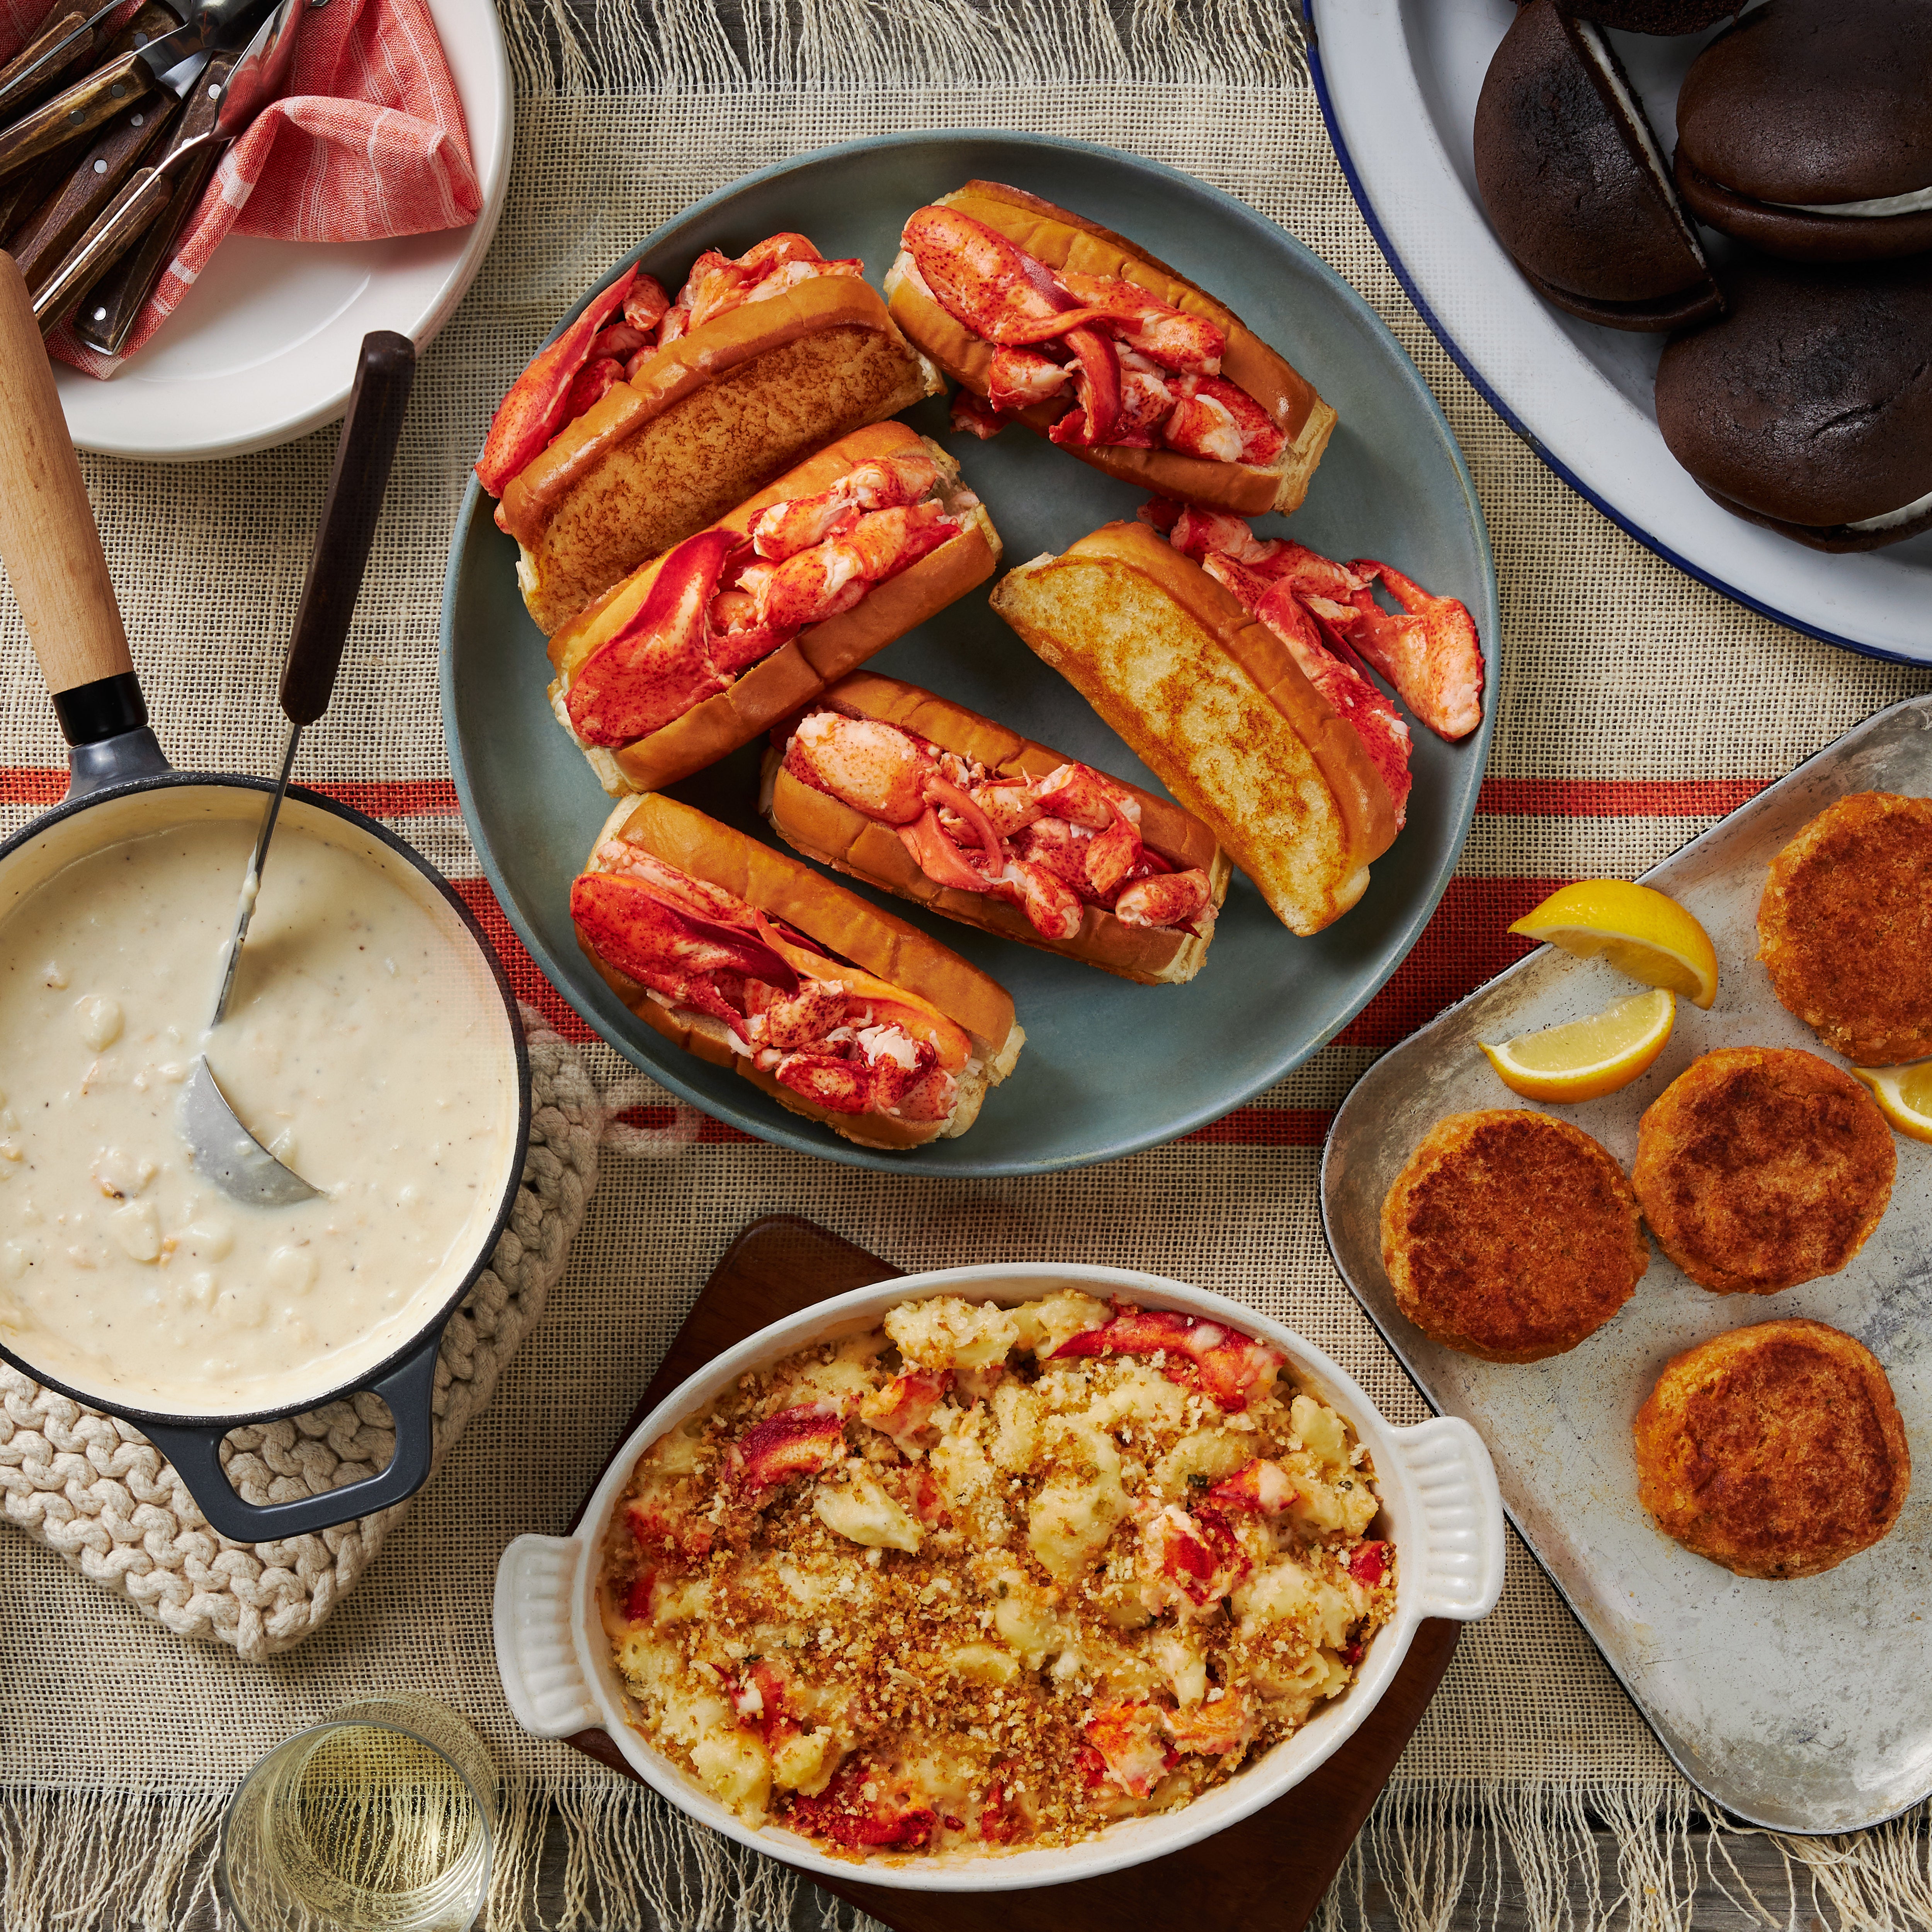 An image of our Casco Bay Pack. 6 Lobster Rolls from our at home lobster roll kit in the center, surrounded by chocolate whoopie pies, 4 crab cakes, Maine Lobster Mac and cheese, and a pot of new england clam chowder.